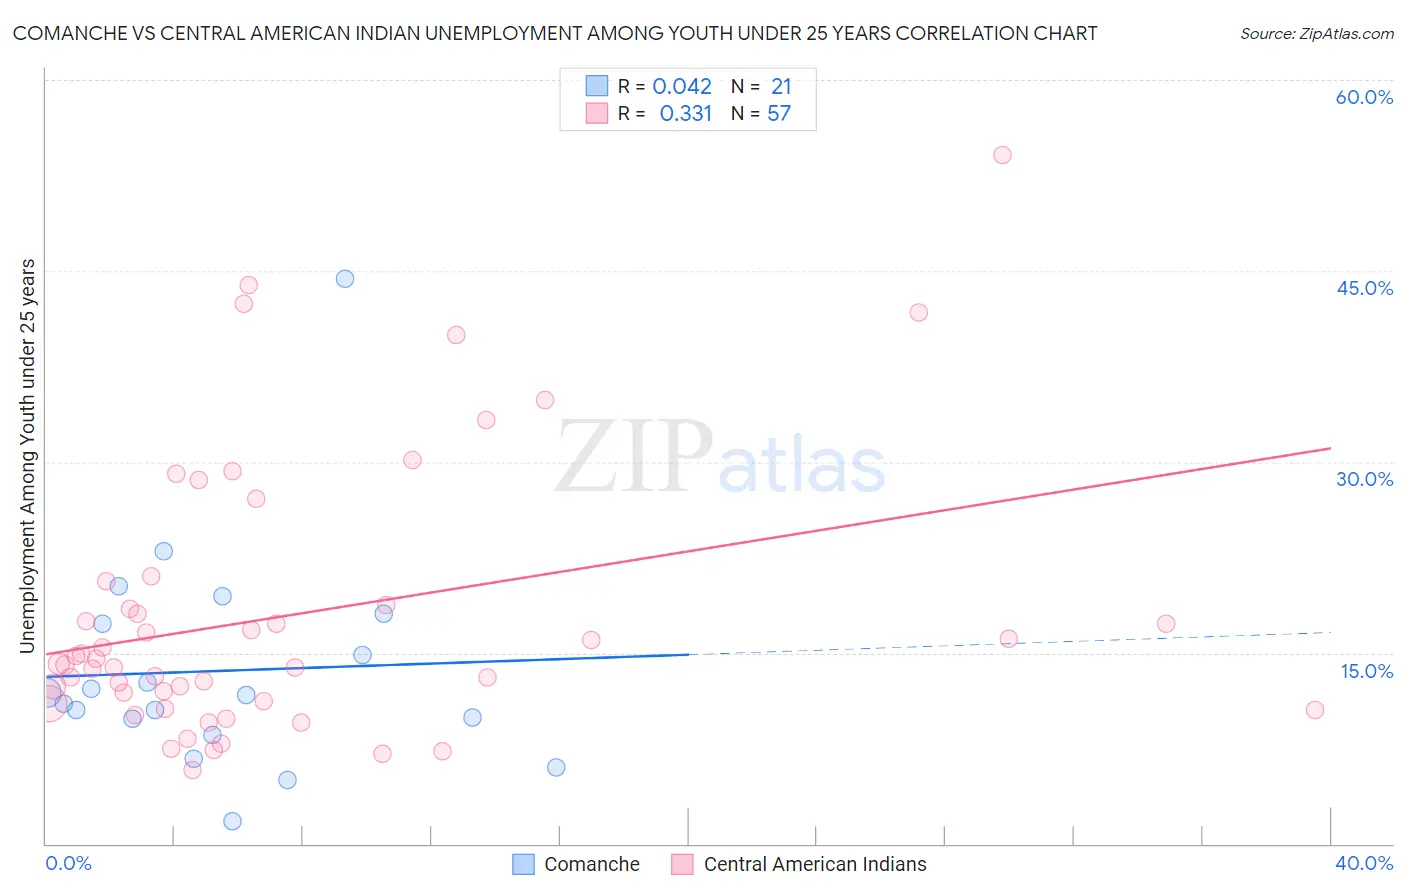 Comanche vs Central American Indian Unemployment Among Youth under 25 years